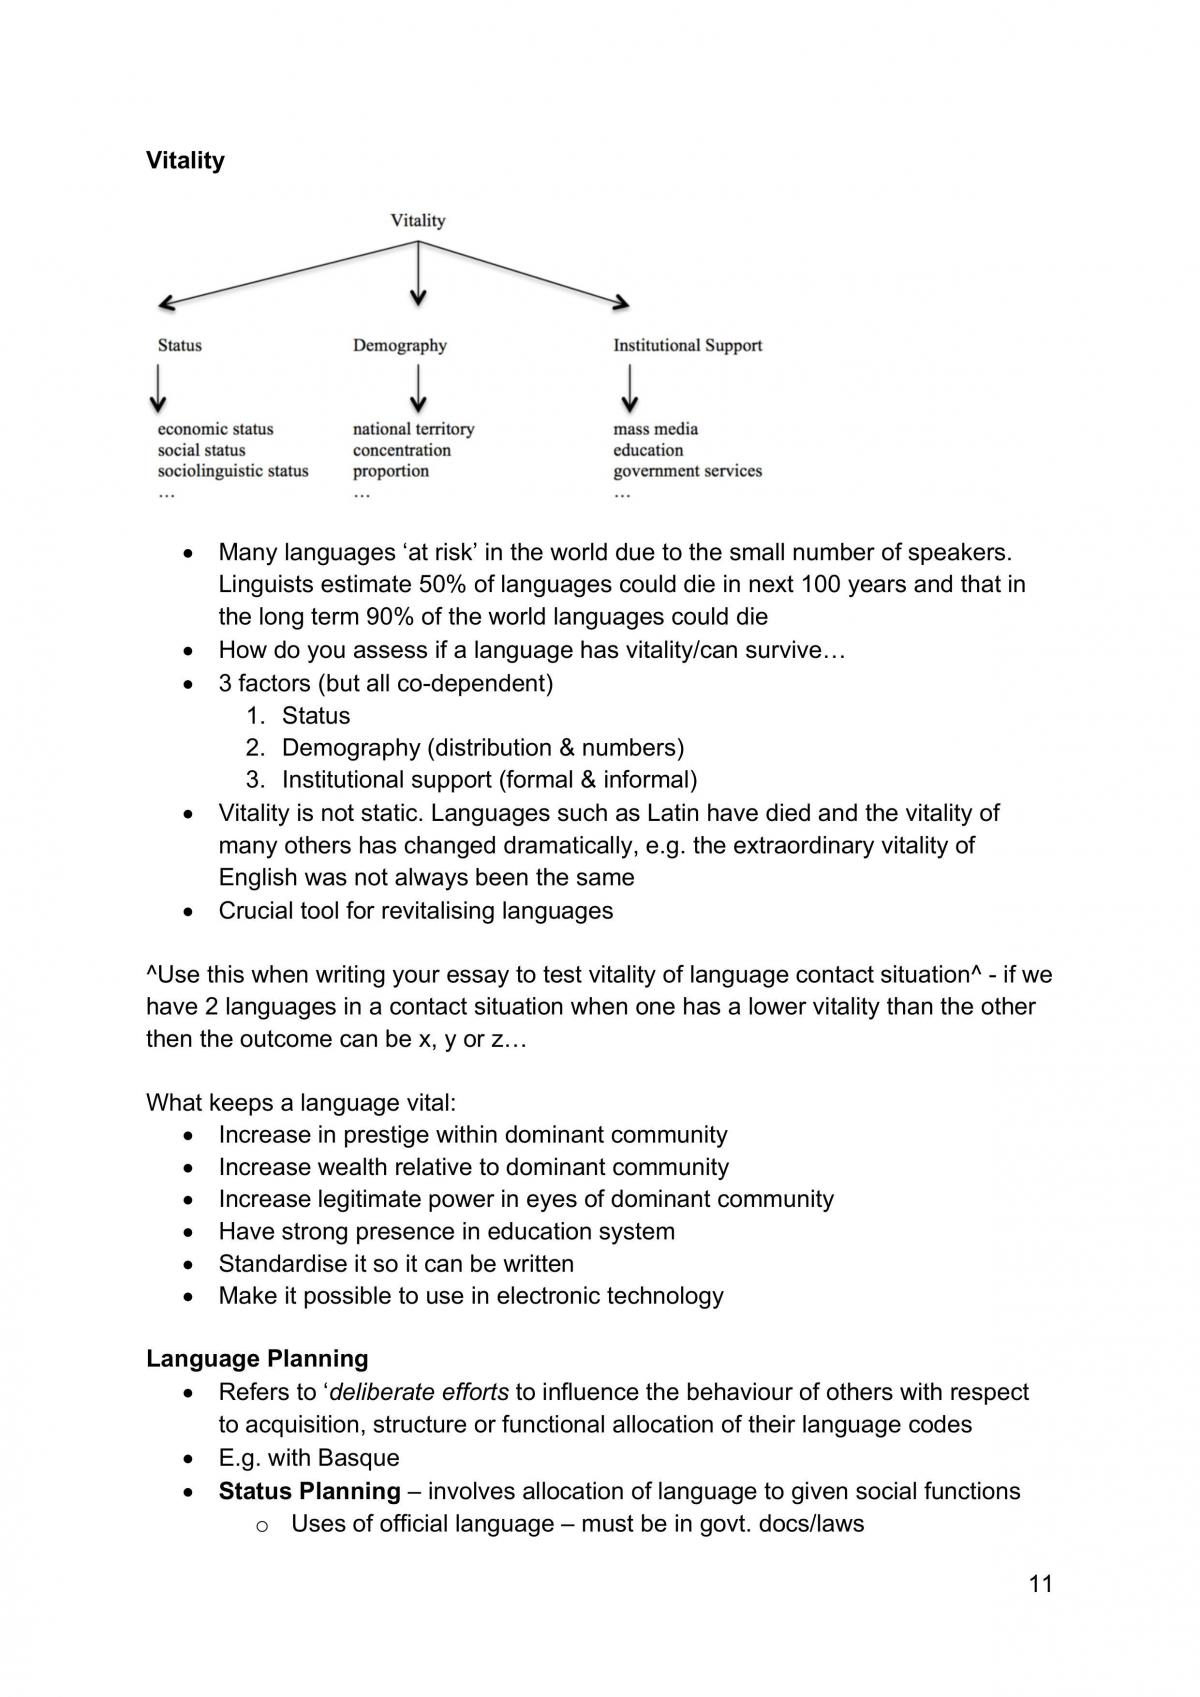 Transnationalism and Linguistic Contact in the Hispanic World Study Notes - Page 11